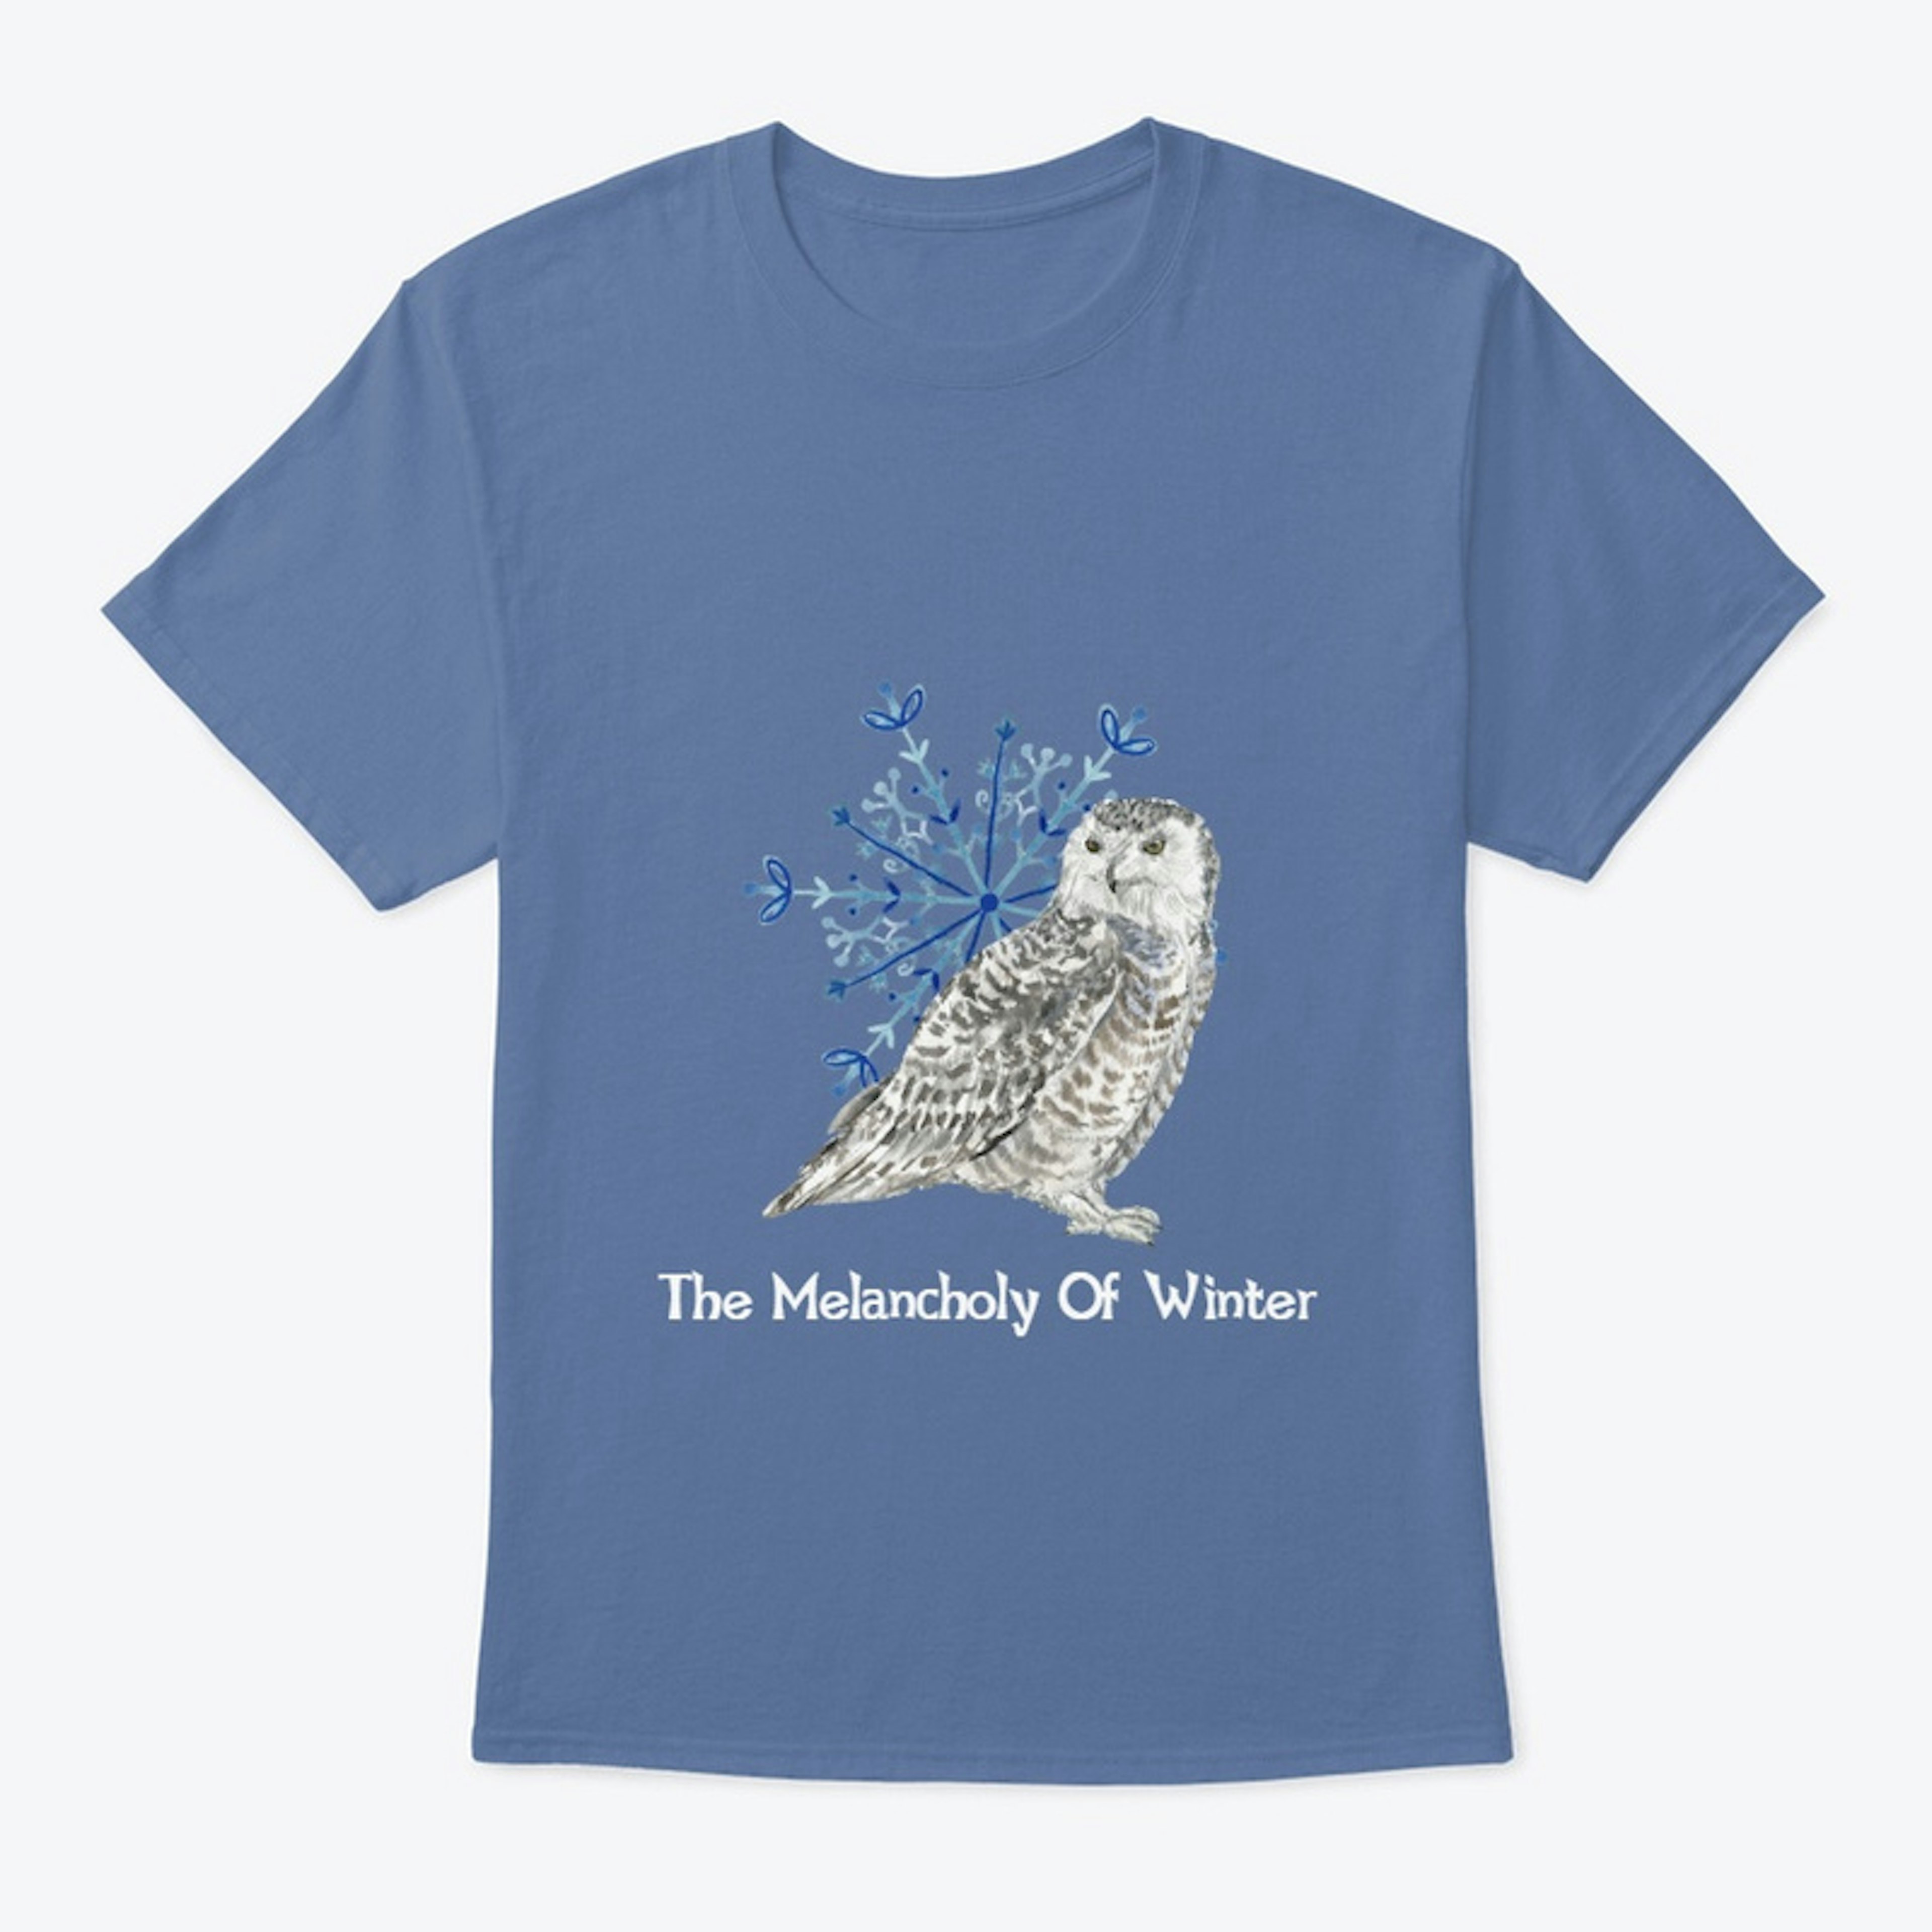 The Melancholy Of Winter T-Shirt